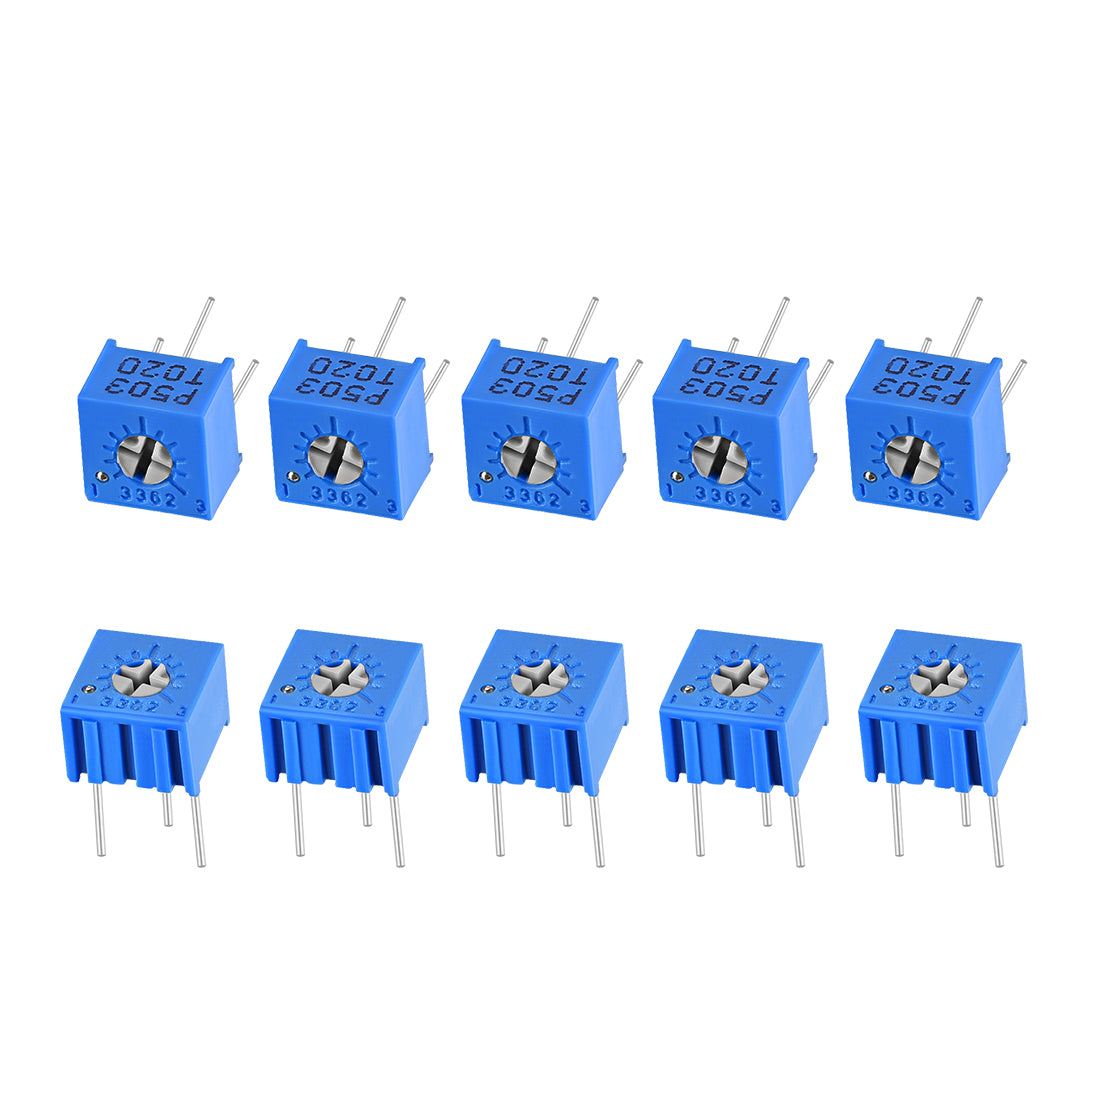 uxcell Uxcell 3362 Trimmer Potentiometer 50K Ohm Top Adjustment Horizontal Variable Resistors 10Pcs